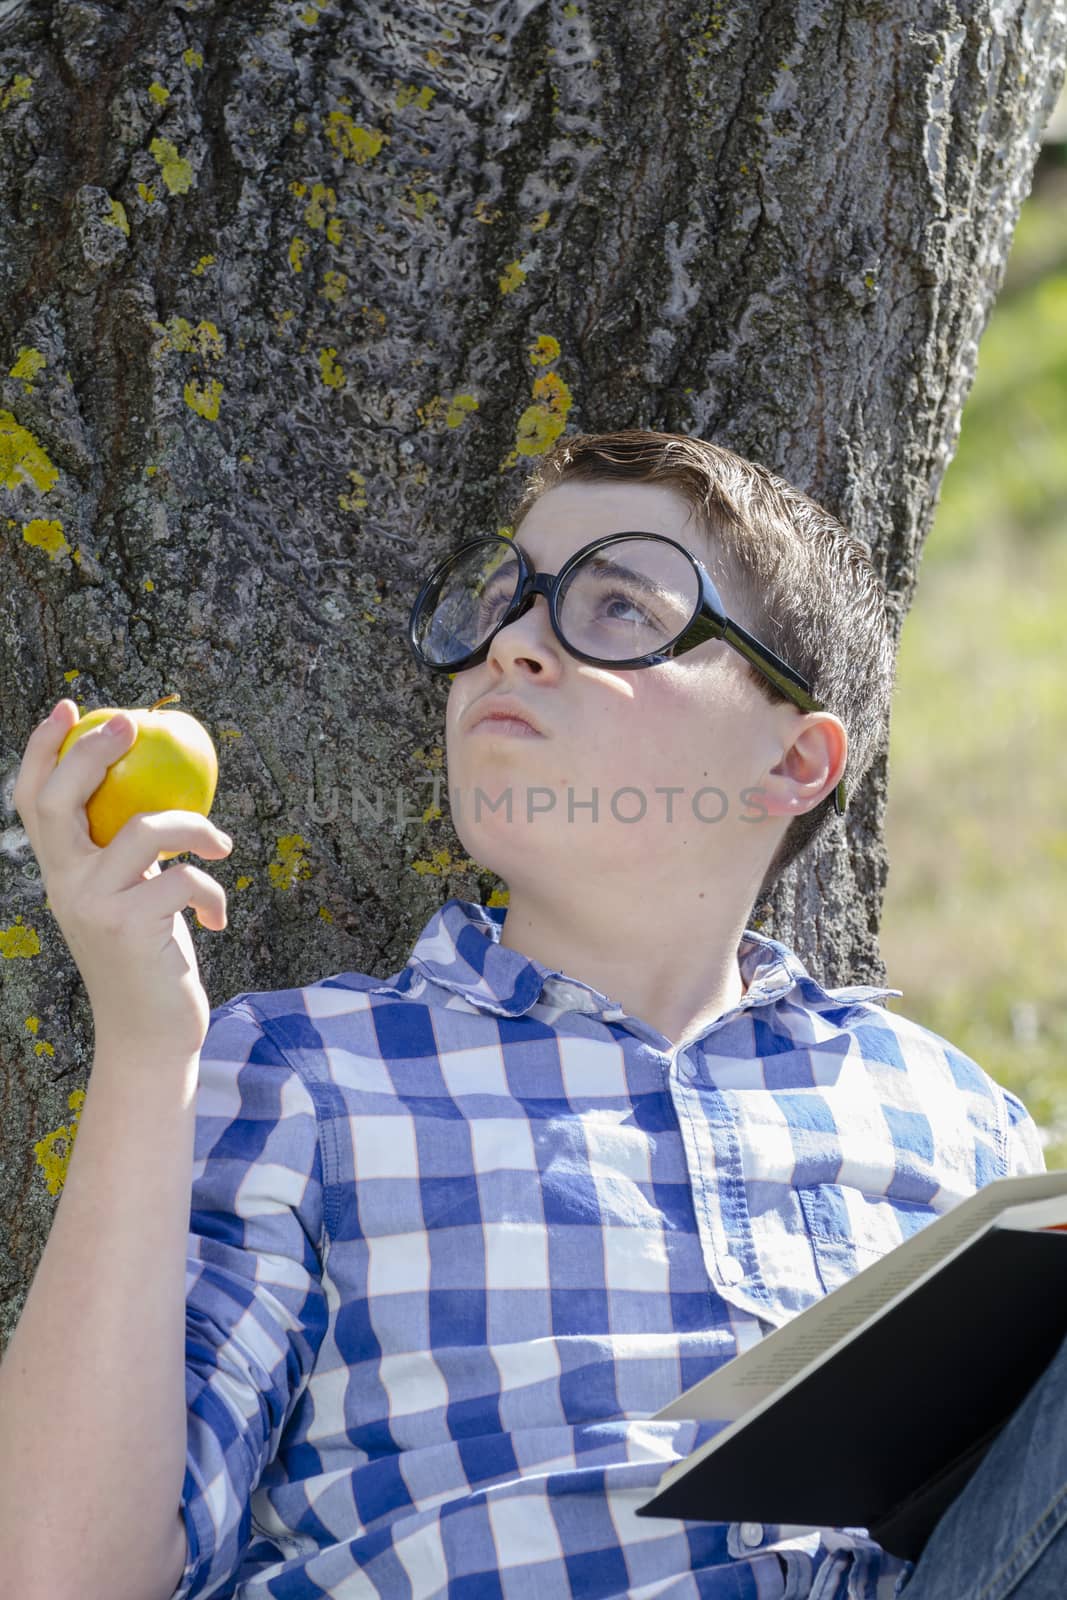 Young boy reading a book in the woods with shallow depth of fiel by FernandoCortes